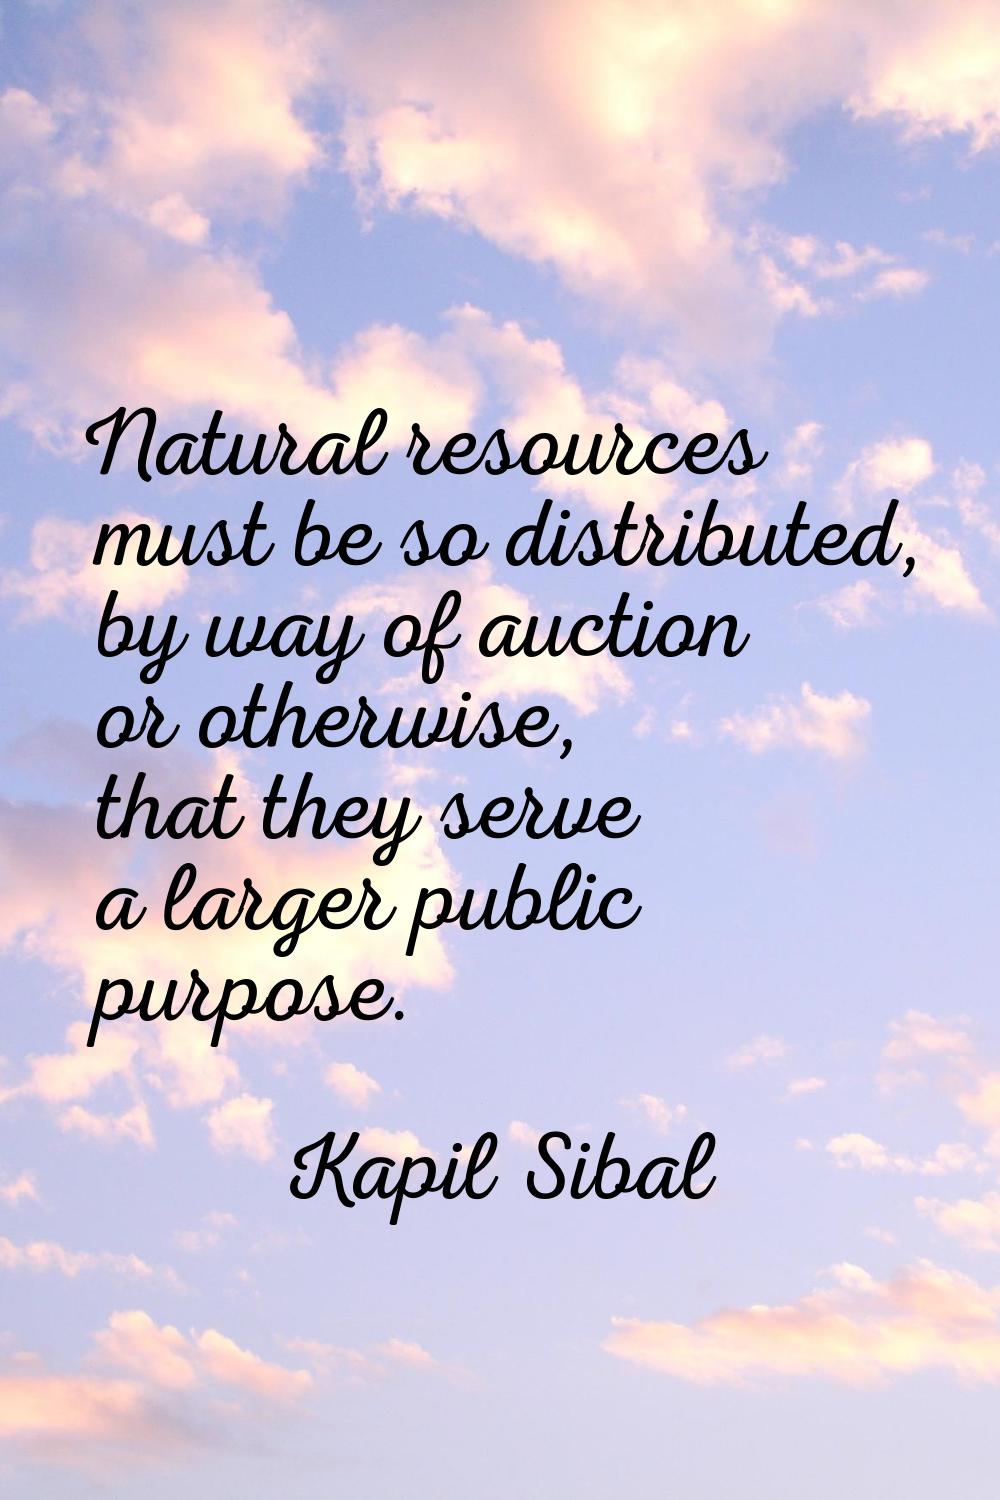 Natural resources must be so distributed, by way of auction or otherwise, that they serve a larger 